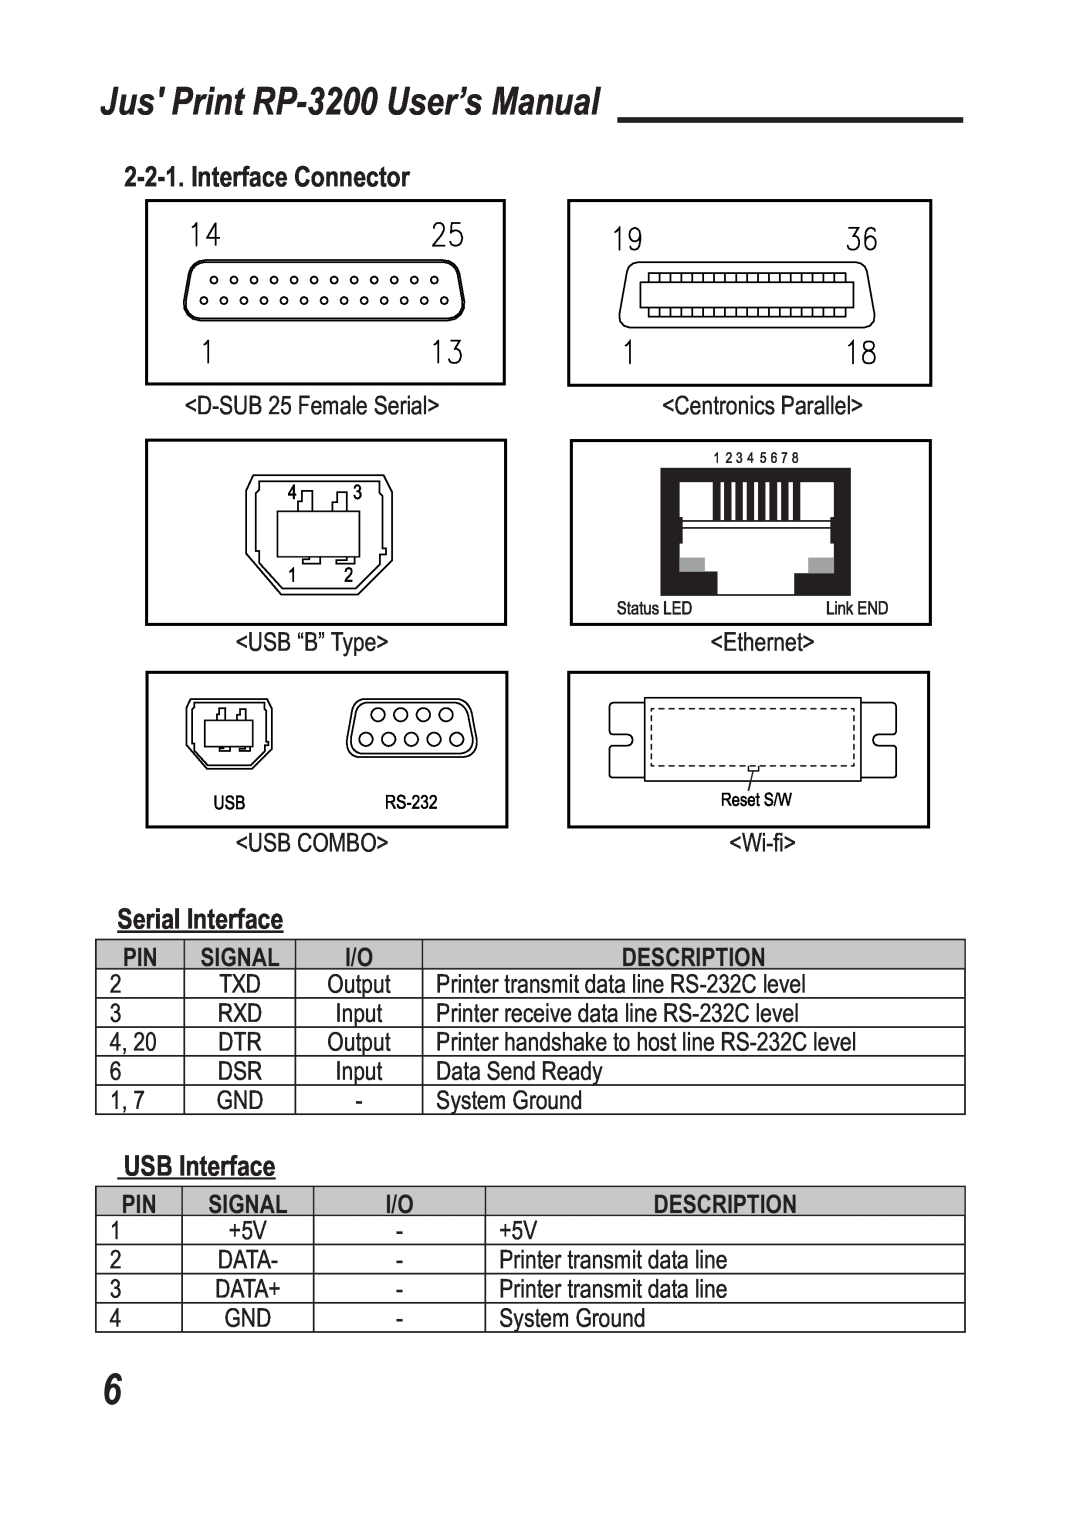 TVS electronic Interface Connector, Serial Interface, USB Interface, Jus Print RP-3200 User’s Manual, Signal 